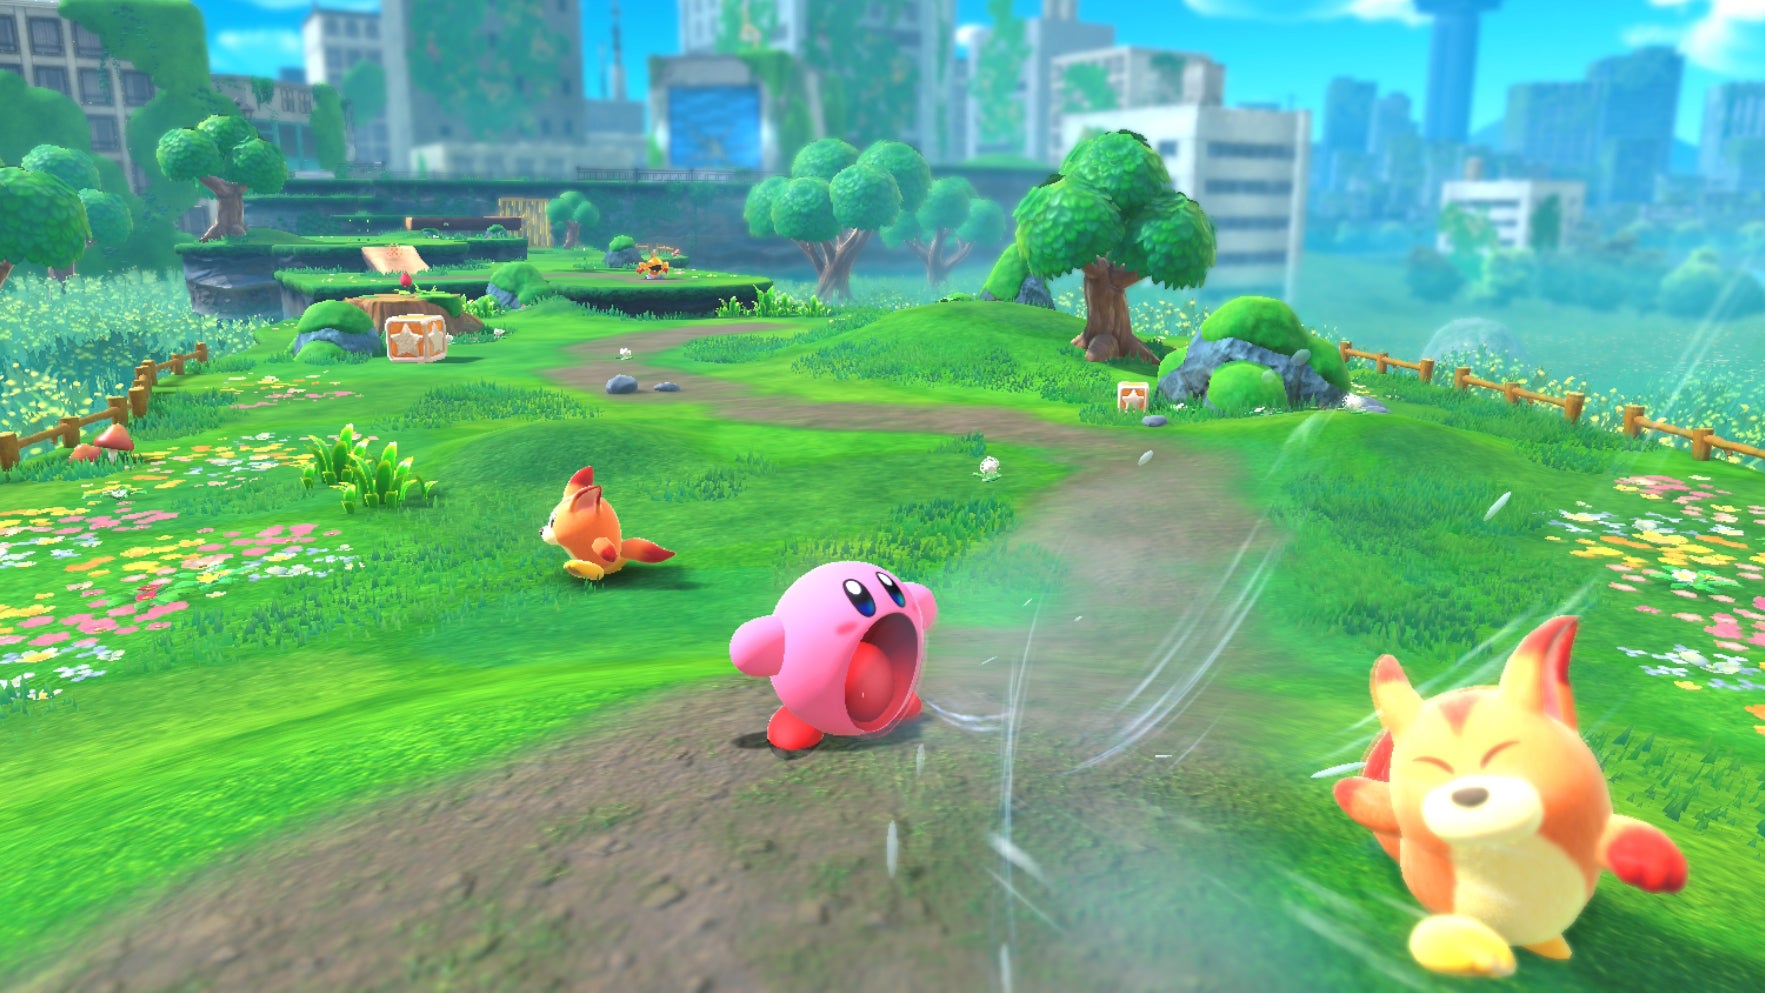 Image for Nintendo considered Kirby too round for 3D platform games before developing the Forgotten Land